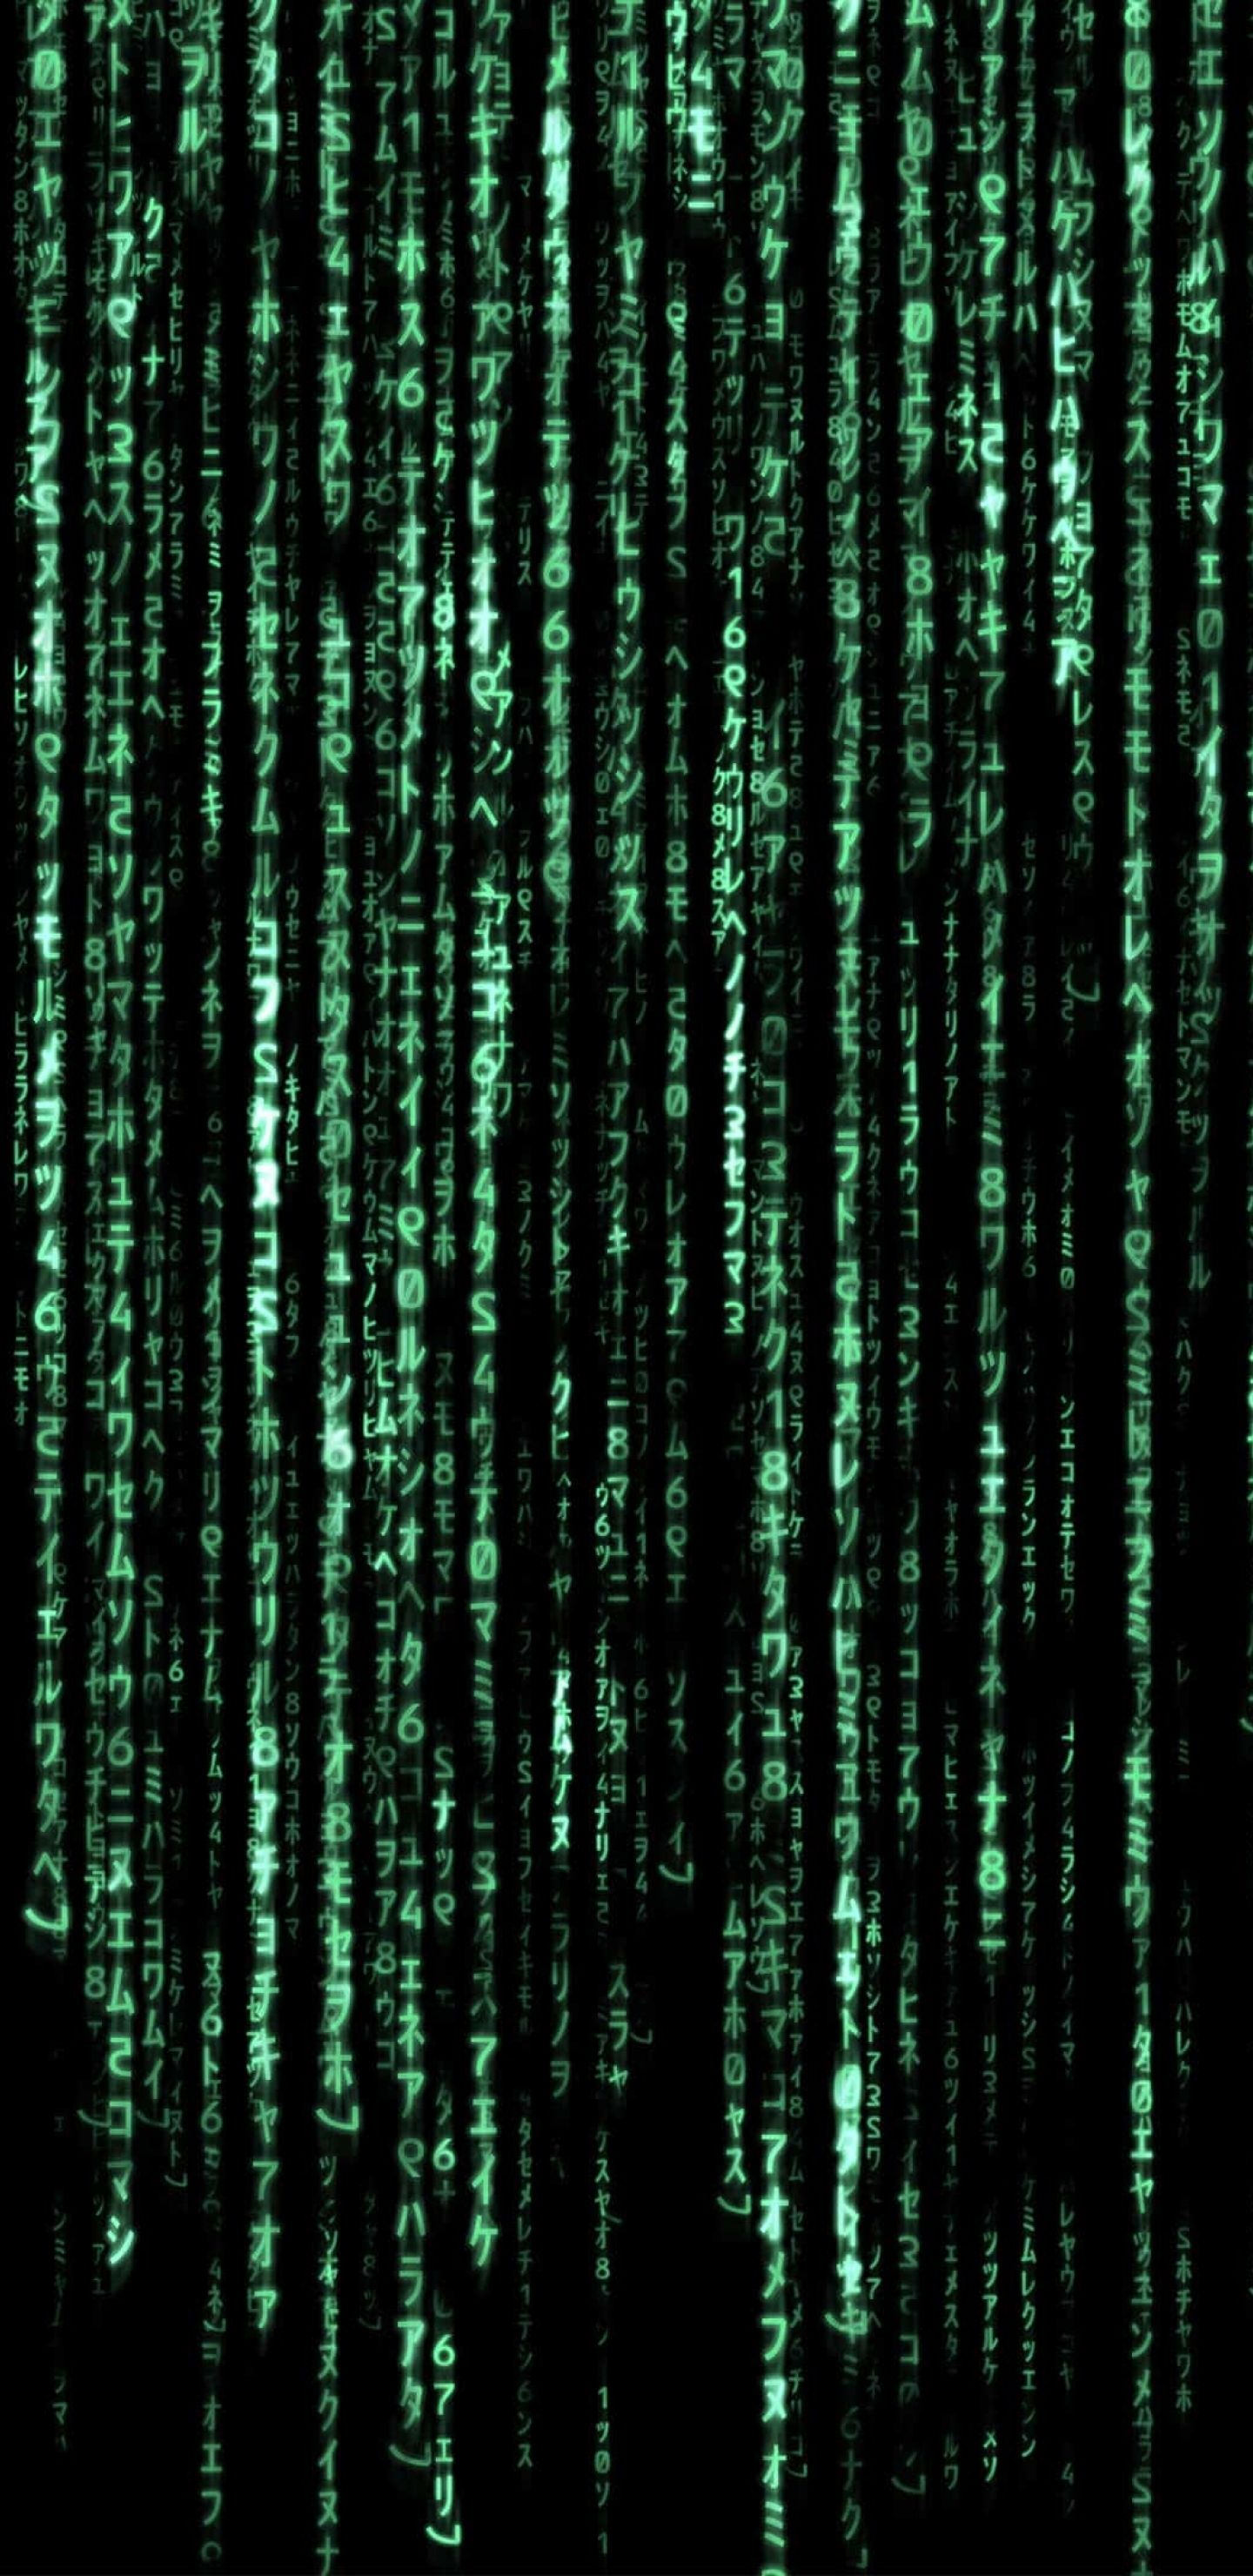 The Matrix 4K Samsung Galaxy Note S S SQHD Wallpaper, HD Movies 4K Wallpaper, Image, Photo and Background